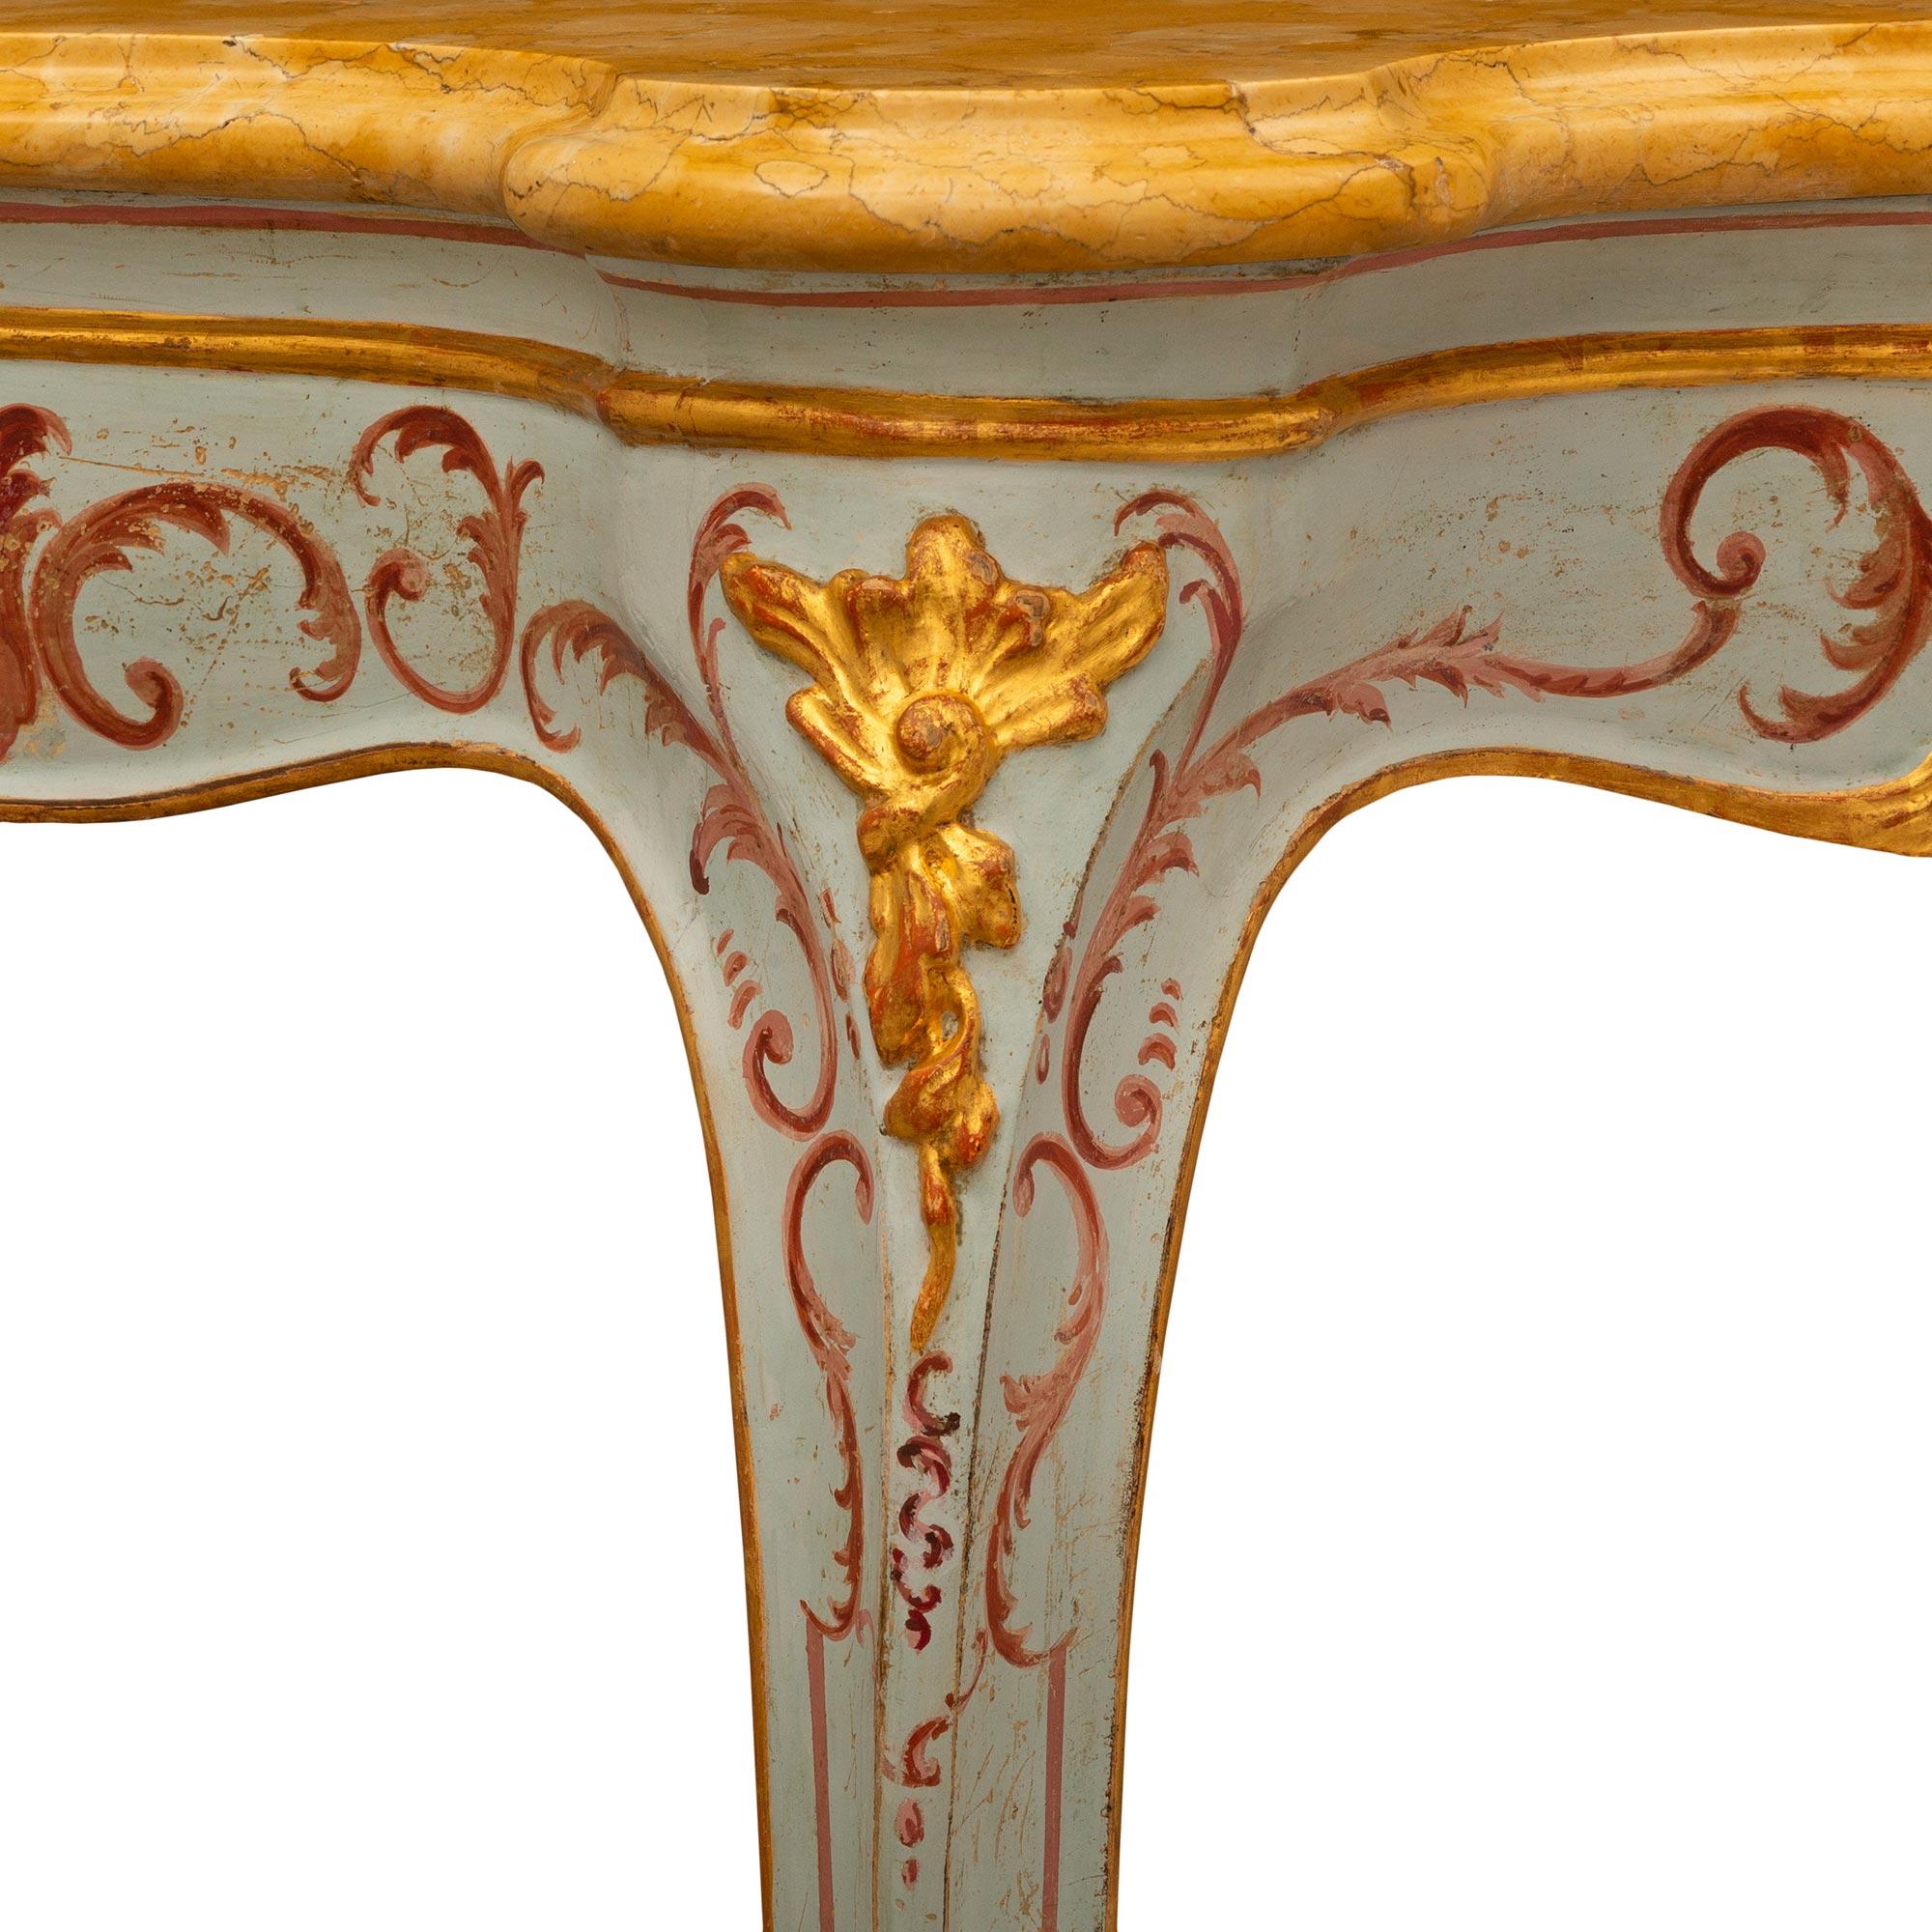  Pair Of Italian 18th c. Venetian St. Giltwood, Patinated Wood & Marble Consoles For Sale 3